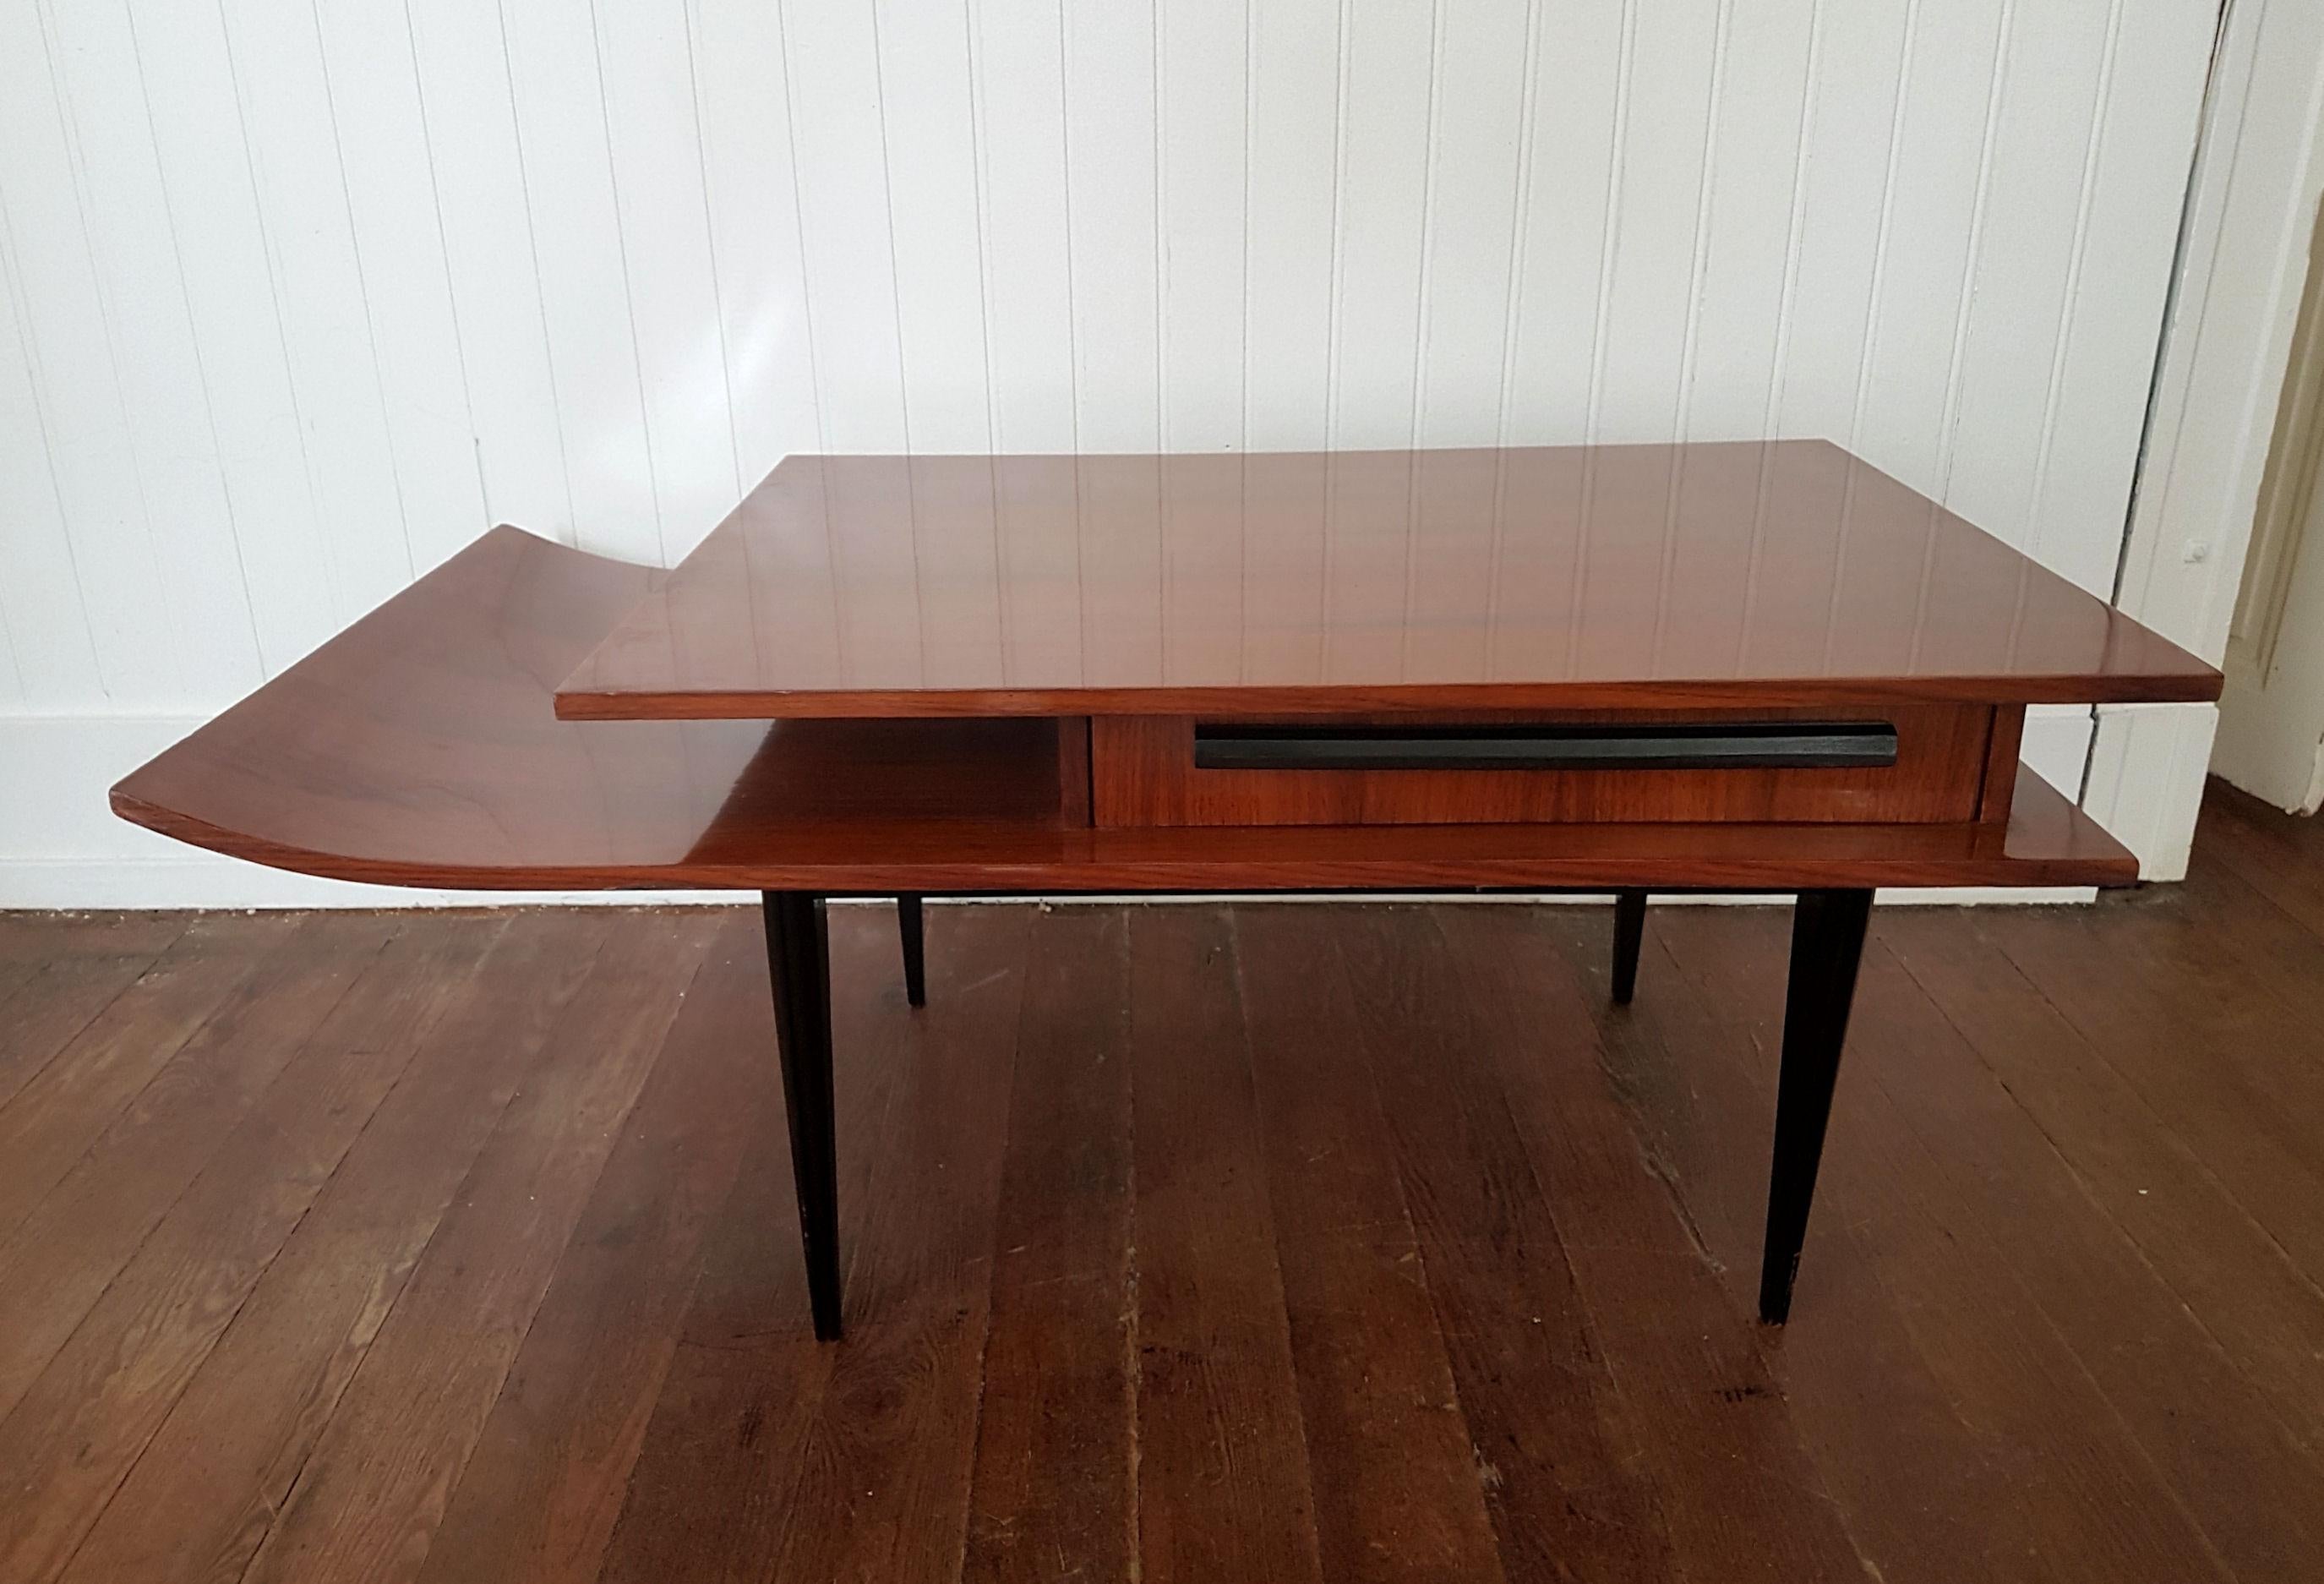 Rosewood Italian, Mid-Century Modern side table, or coffee table.
1 drawer, opening from both sides.
4 legs in wood, painted black.
No alterations or repairs,
circa 1960.
Excellent condition.